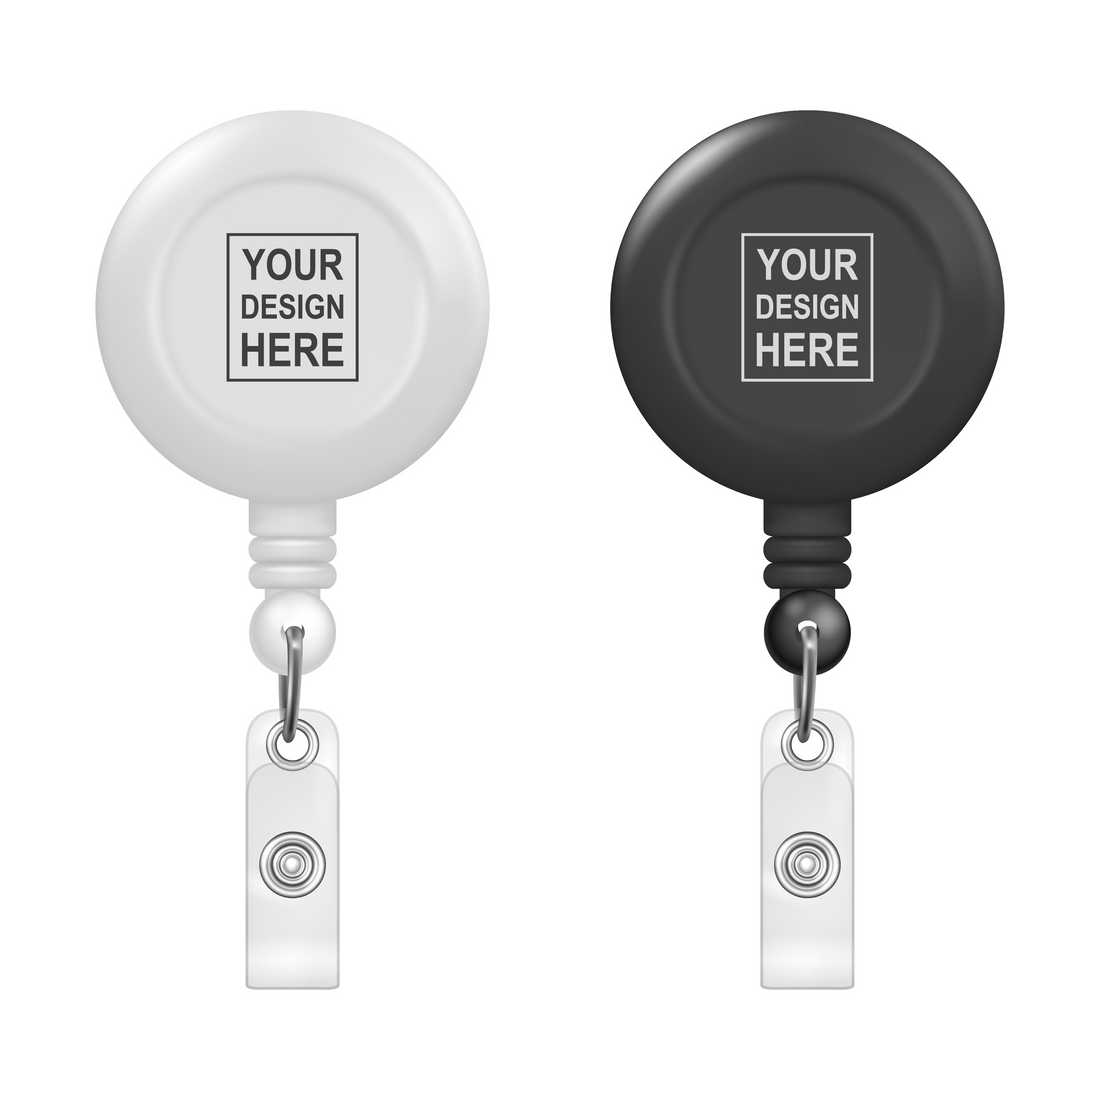 How To Customize Your Company's Badge Reel